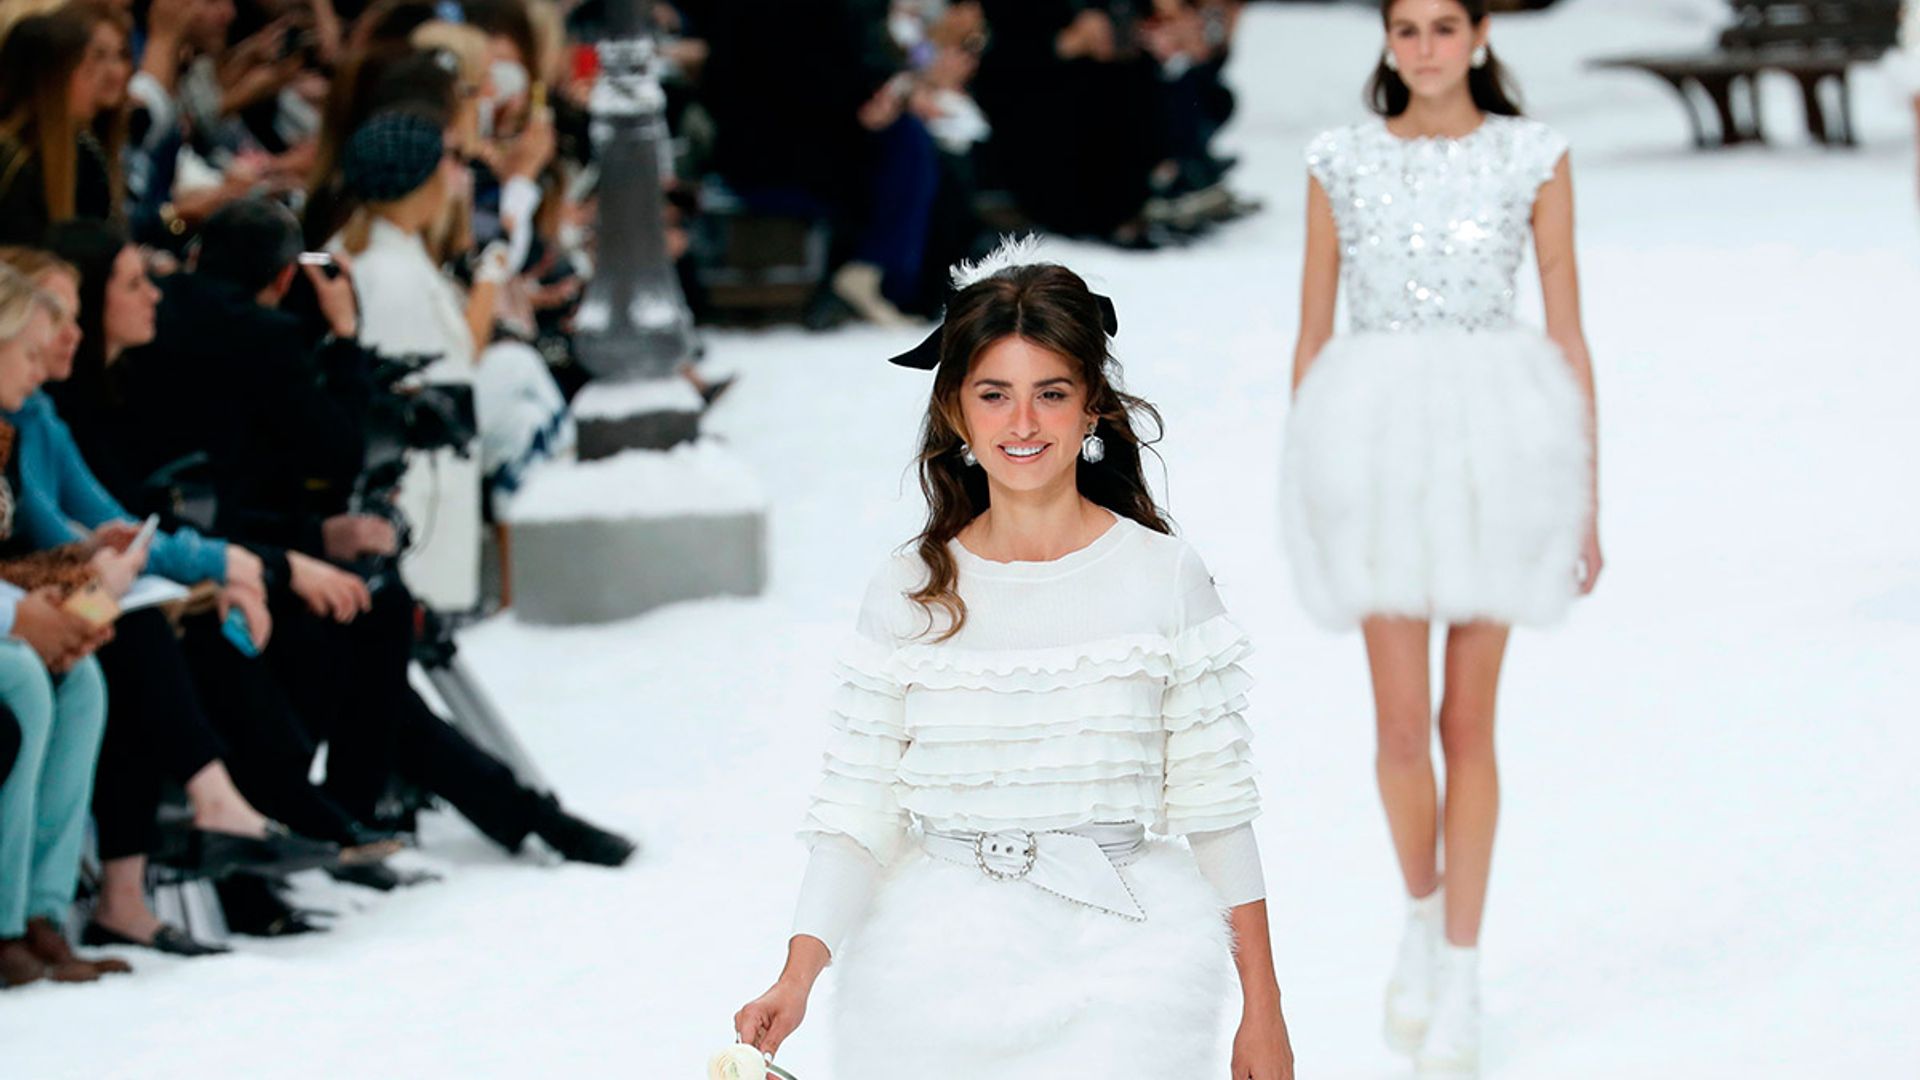 Penelope Cruz walks the Chanel AW19 catwalk carrying a white rose in tribute to Karl Lagerfeld